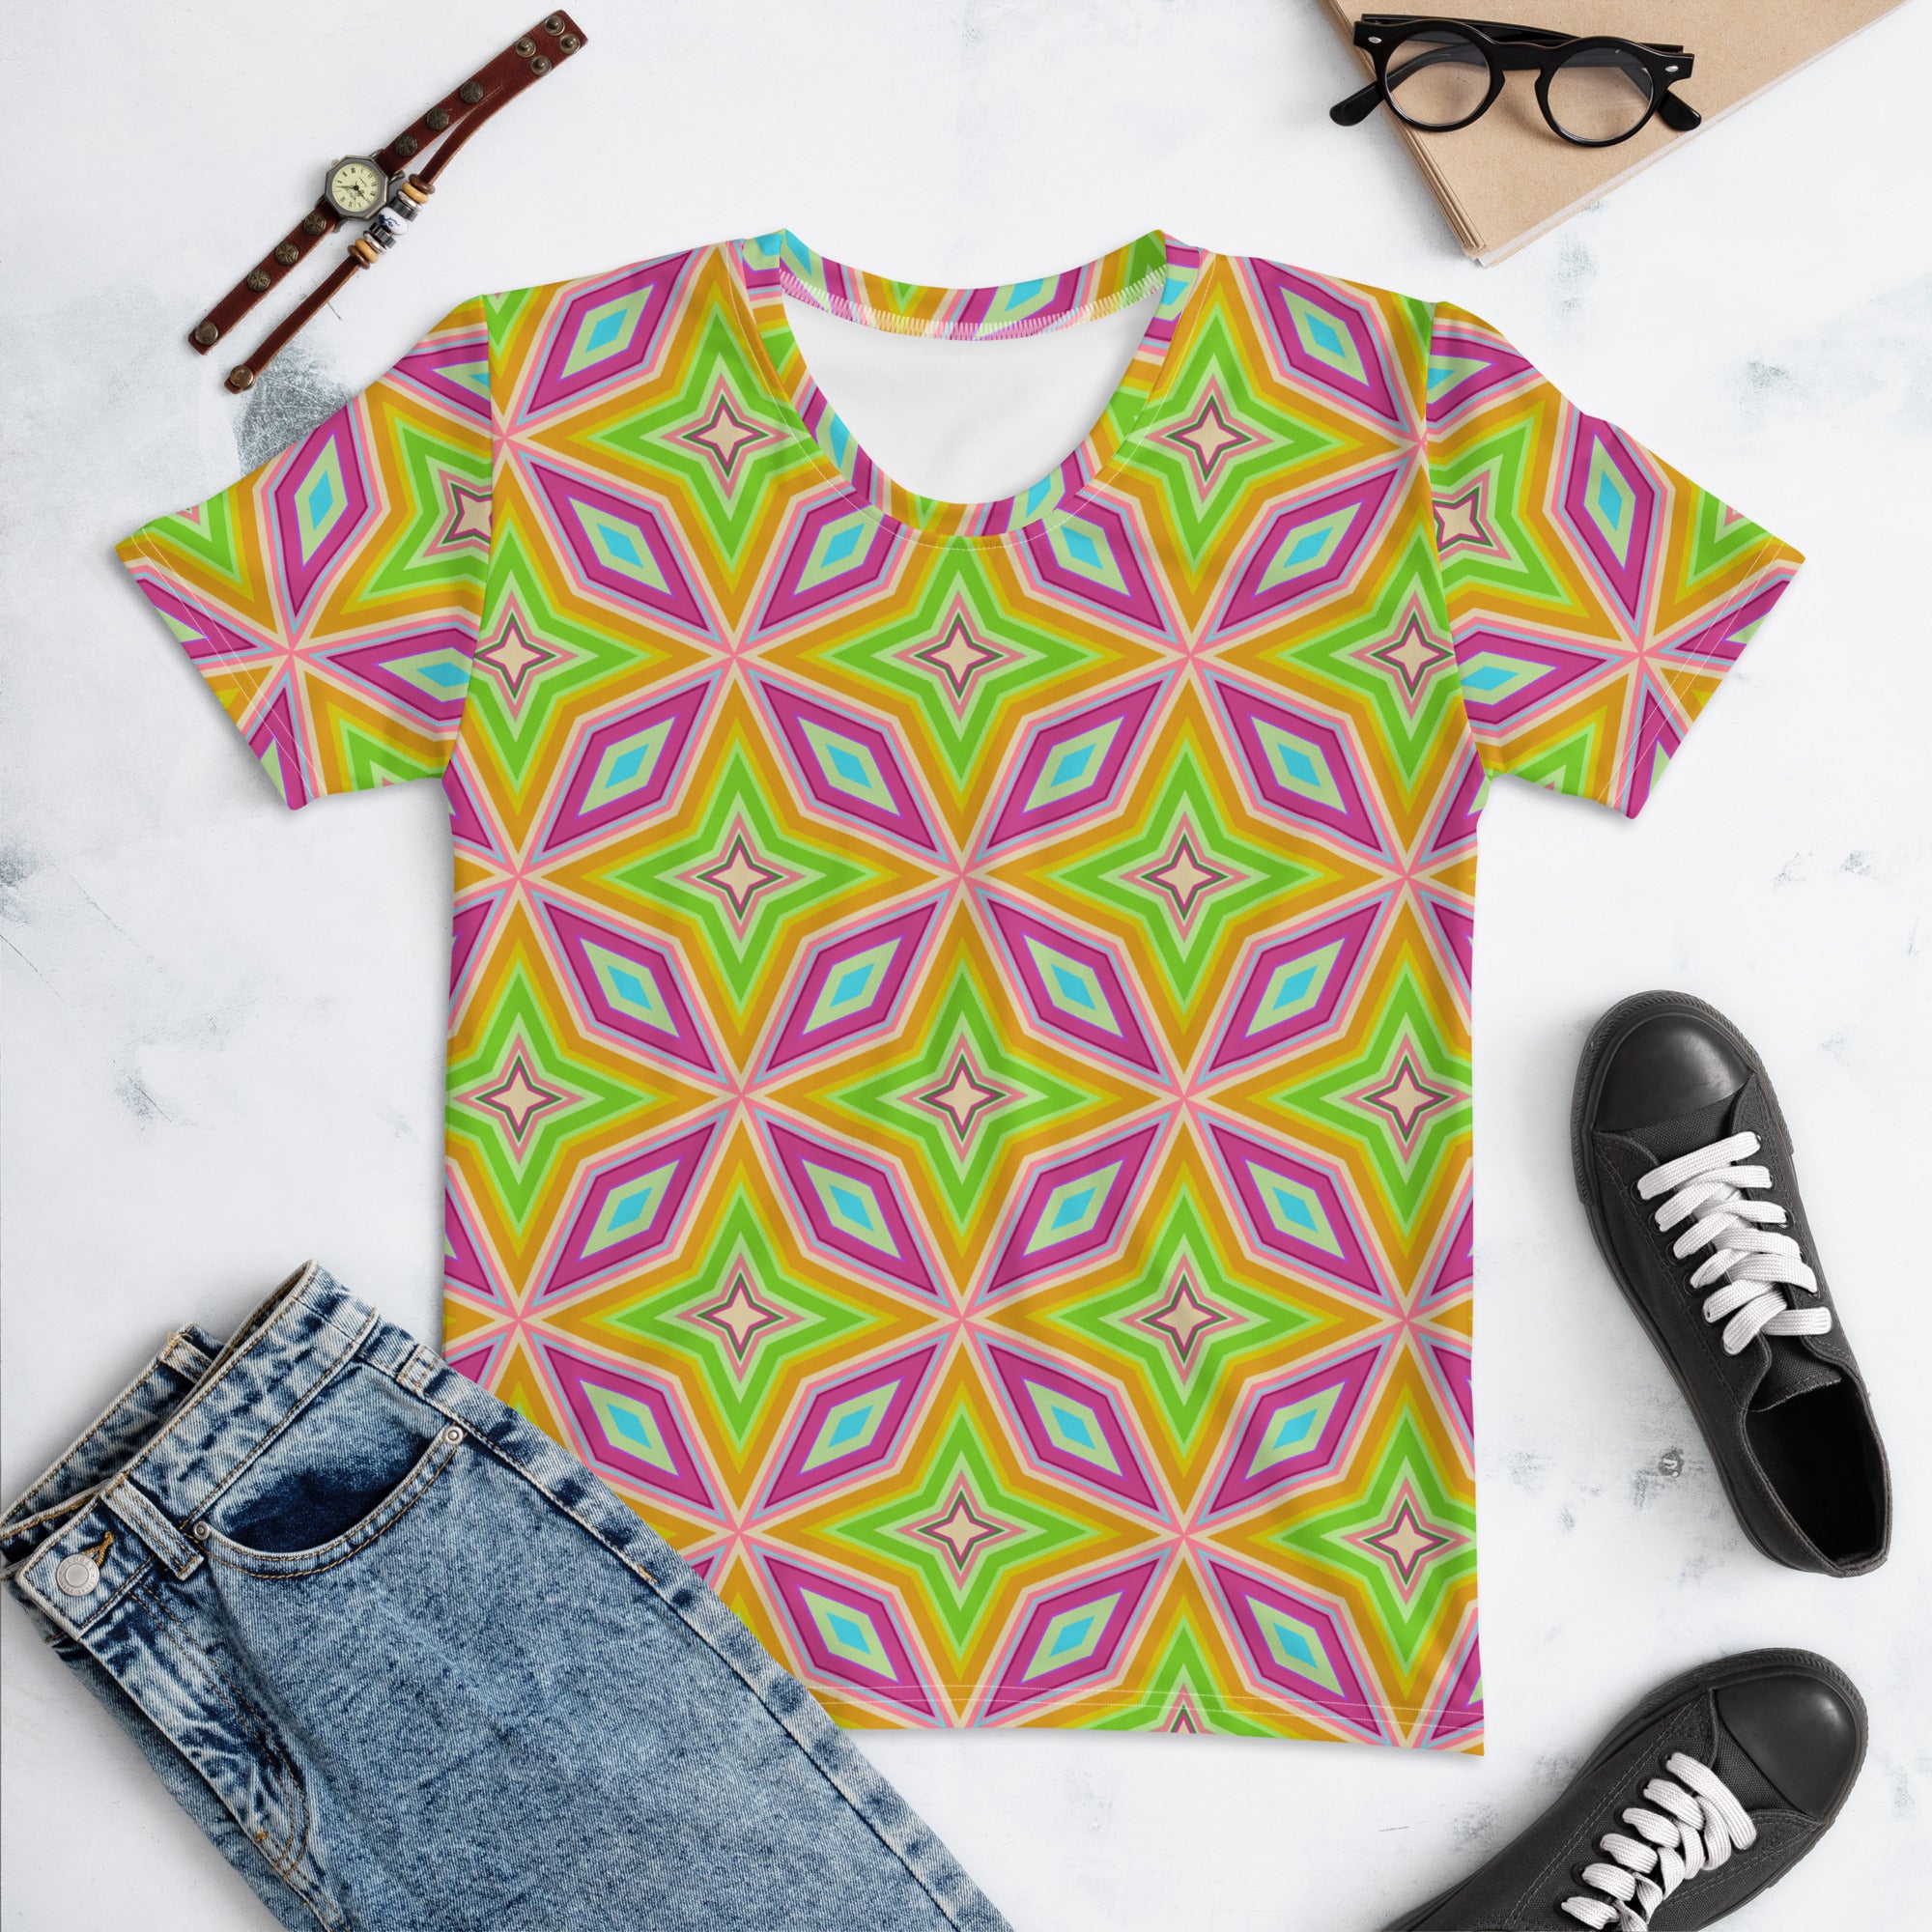 Abstract Artistry pattern on women's crewneck t-shirt